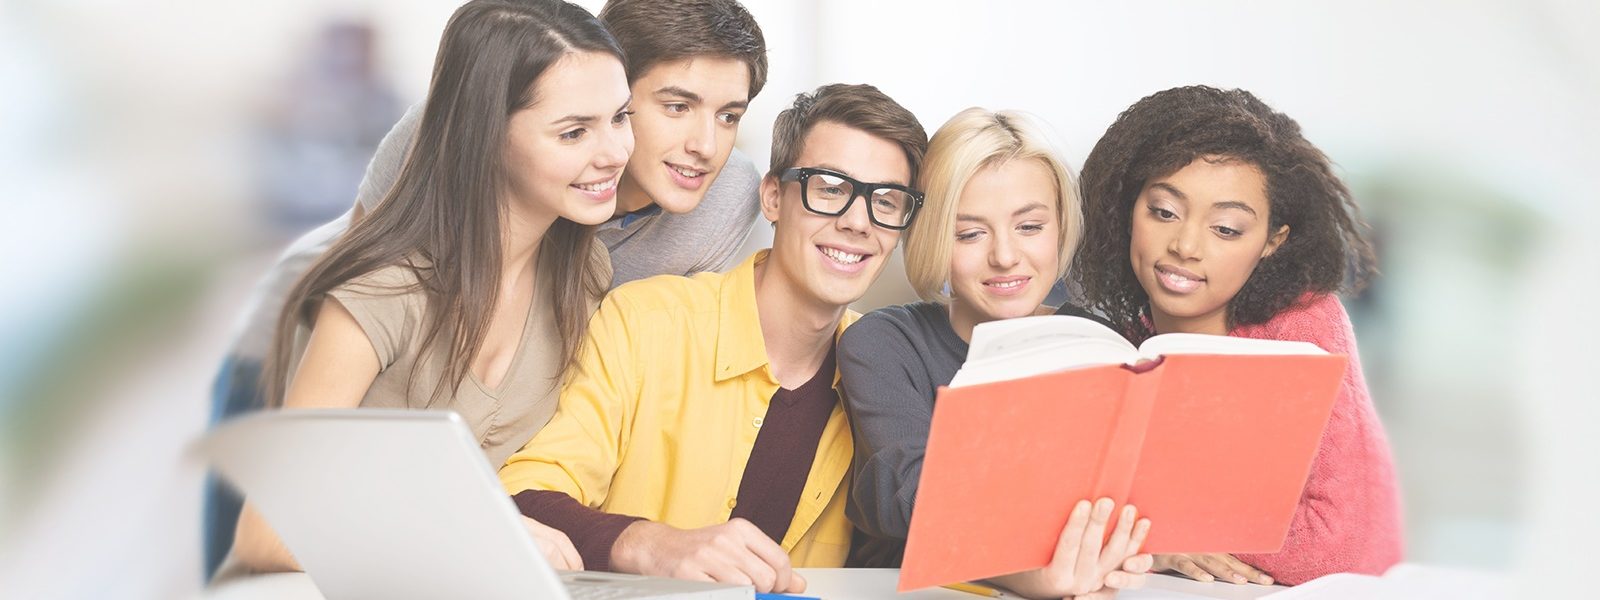 Study Pre-sessional English course online in UK